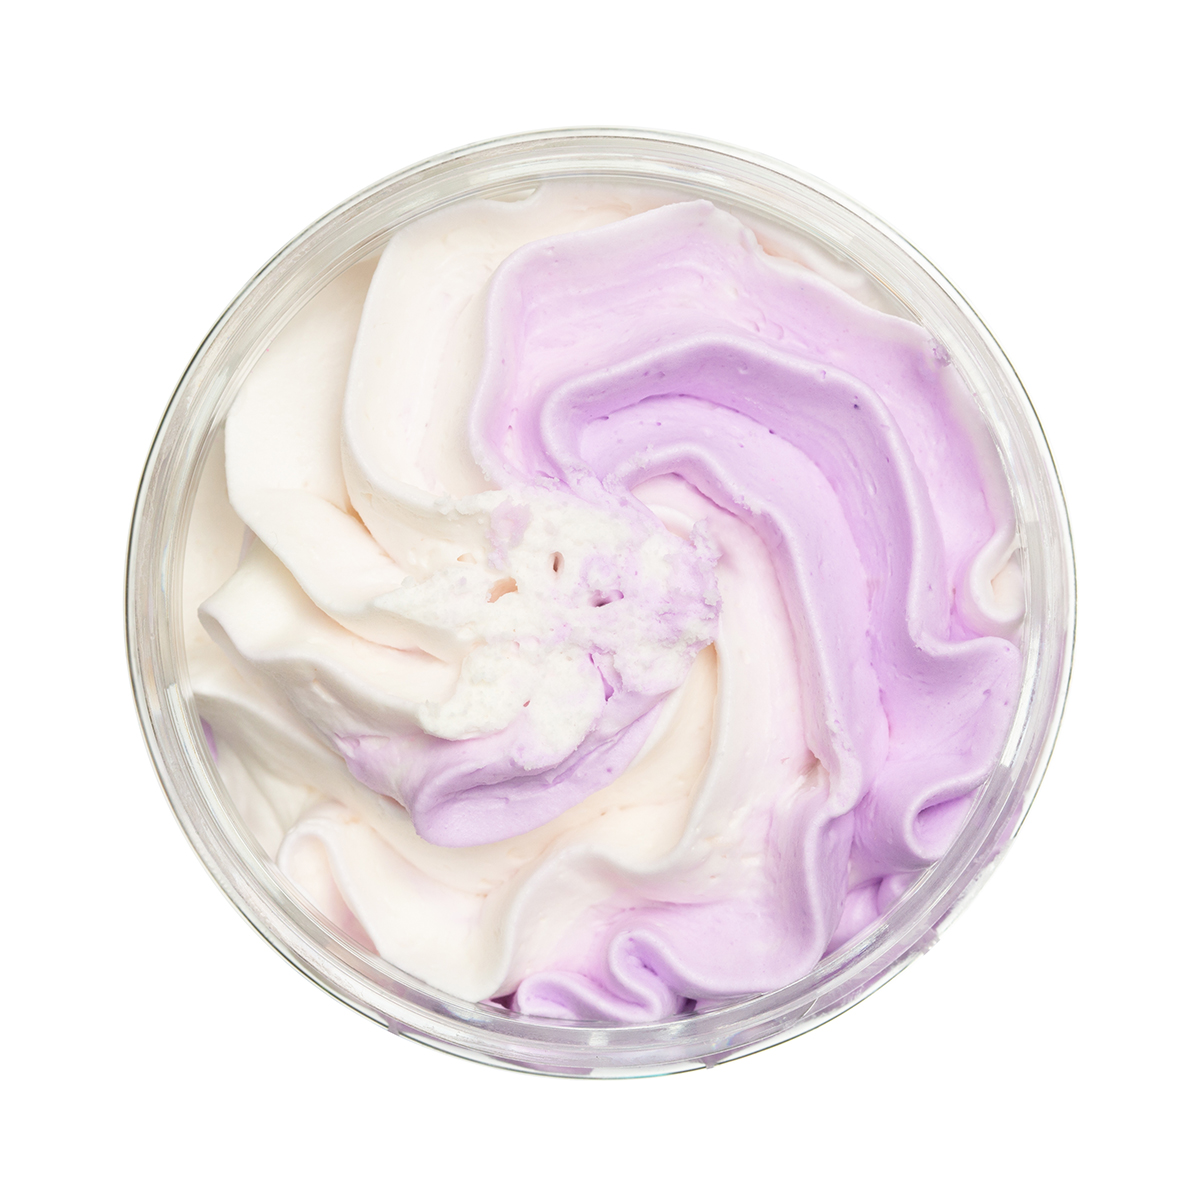 Fizz & Bubble Black Amber And Lavender Whipped Body Butter